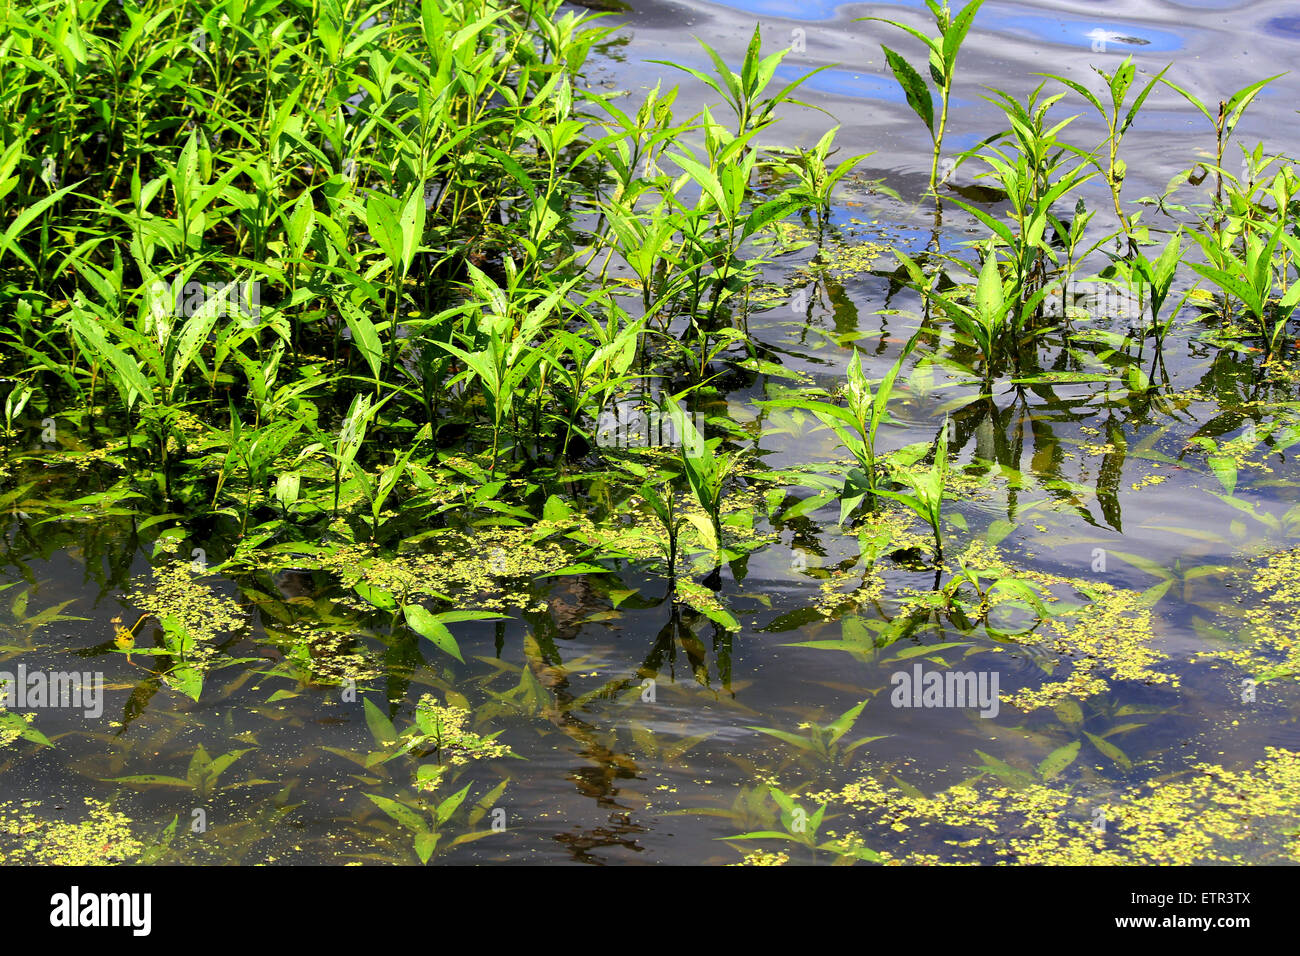 Vegetation/ plant life at a lake in Southern Virginia. Stock Photo